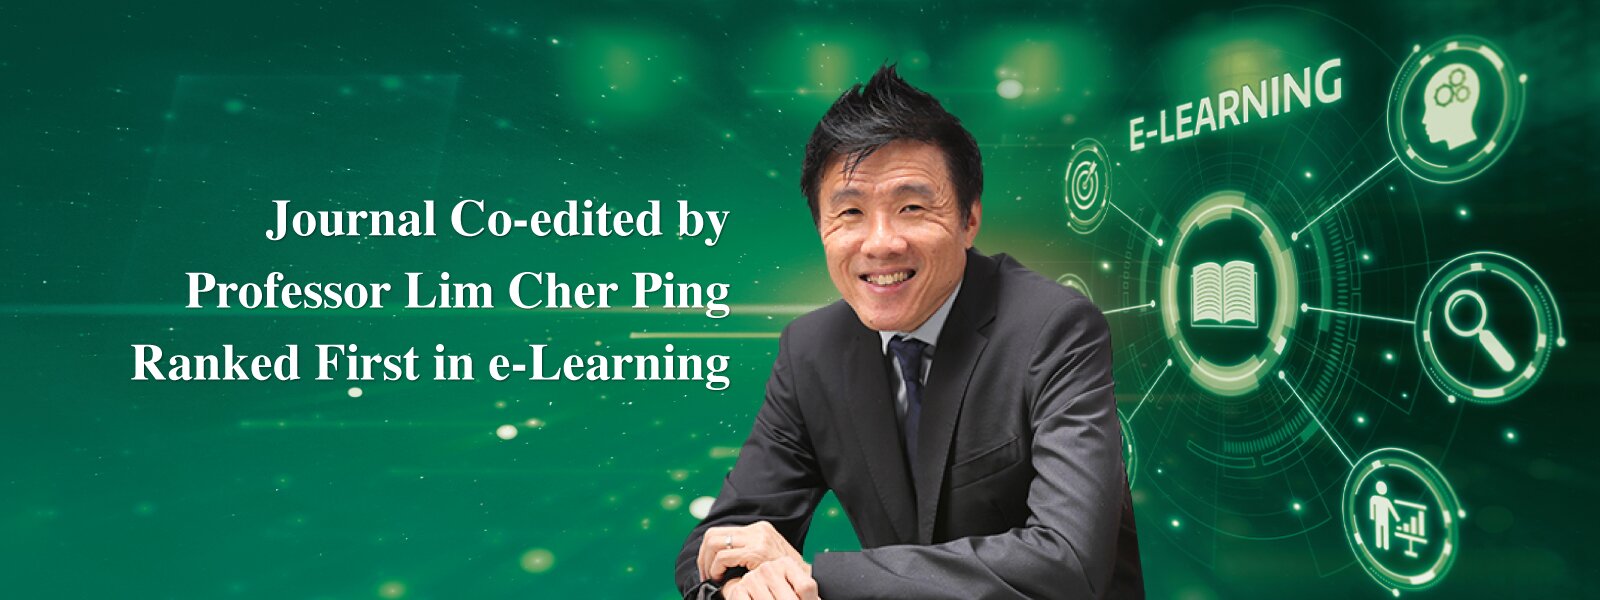 Journal Co-edited by Professor Lim Cher Ping Ranked First in e-Learning